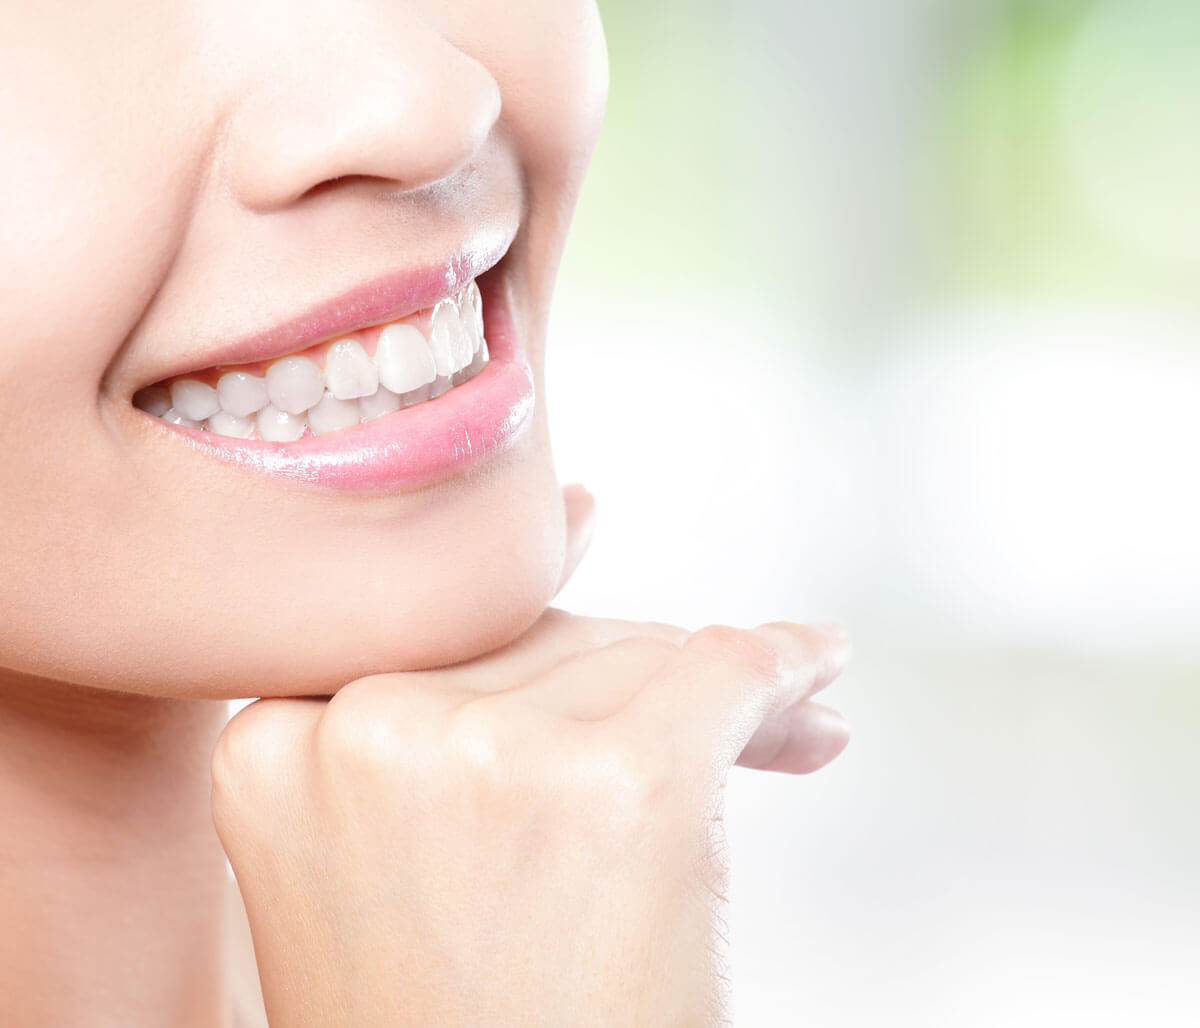 Discover which of the dental whitening systems in Bloomington, IL will be most effective for your smile